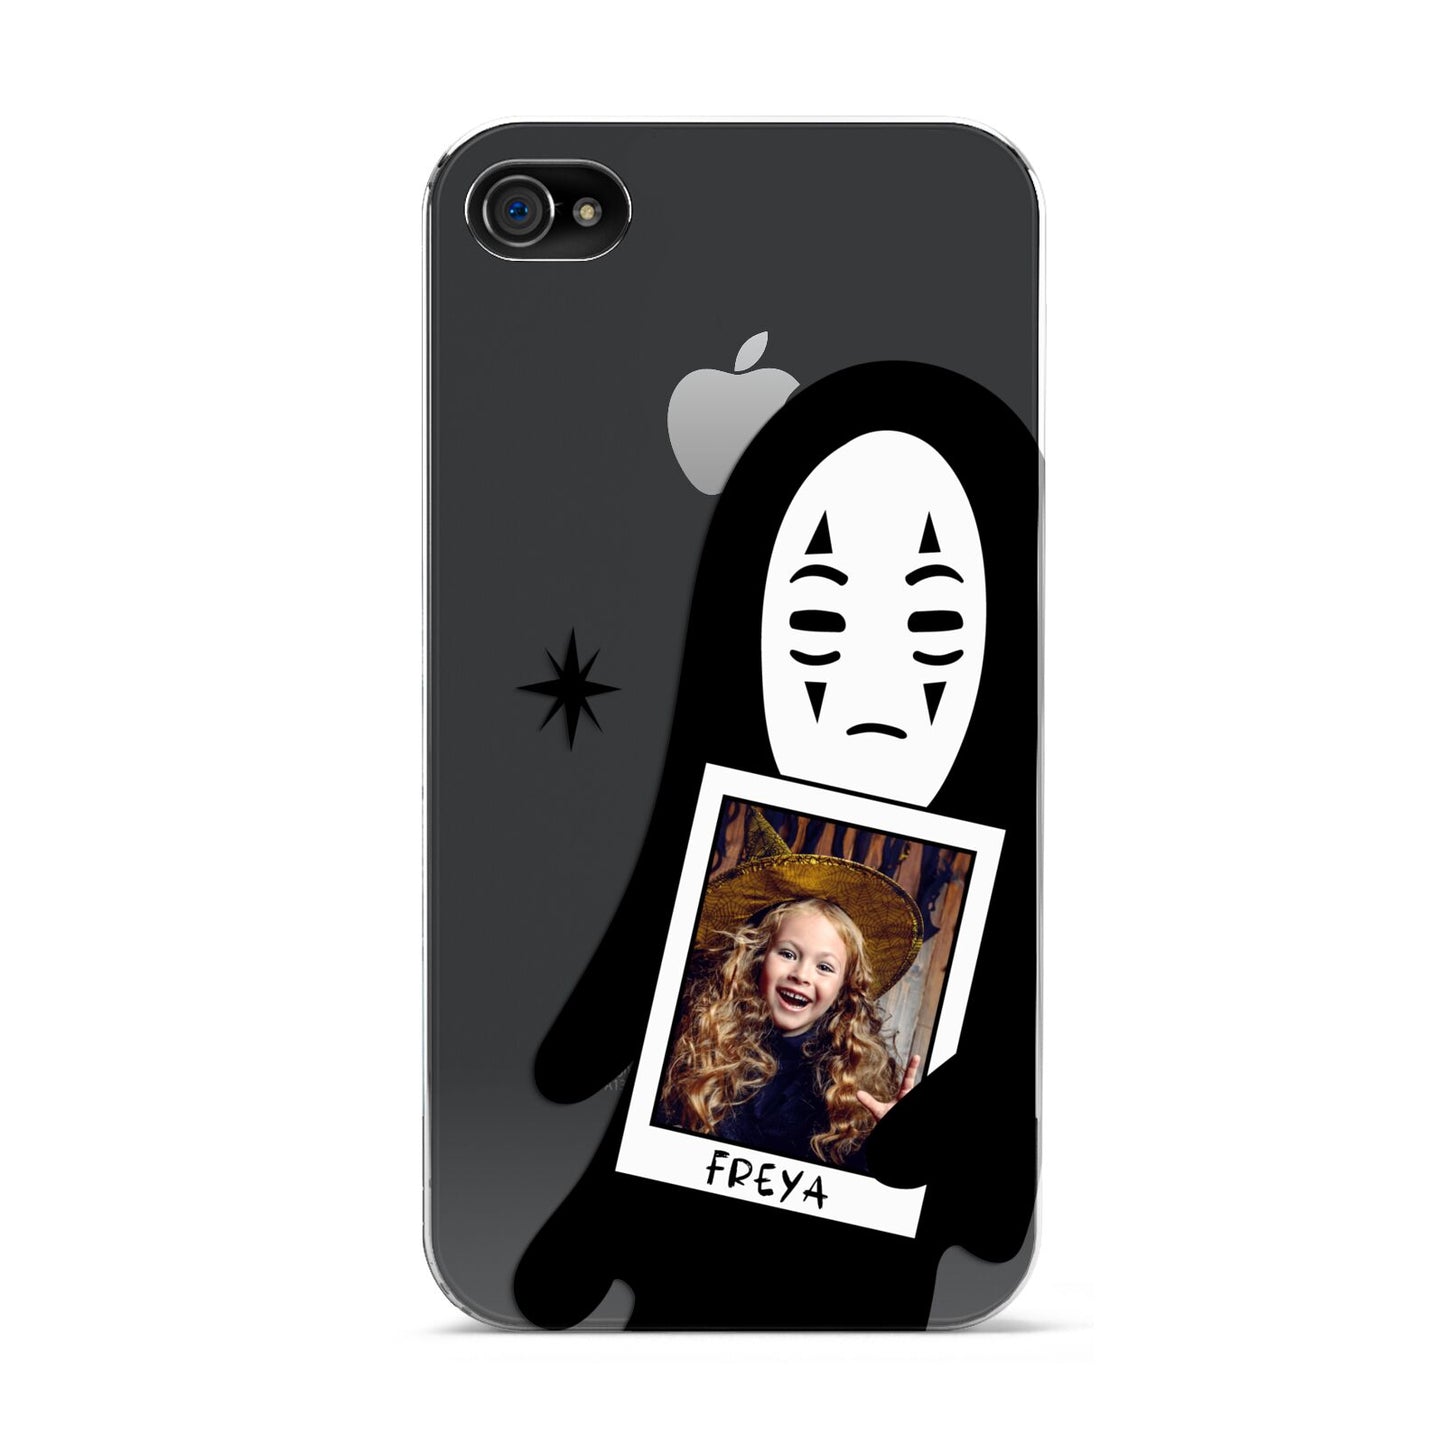 Ghostly Halloween Photo Apple iPhone 4s Case